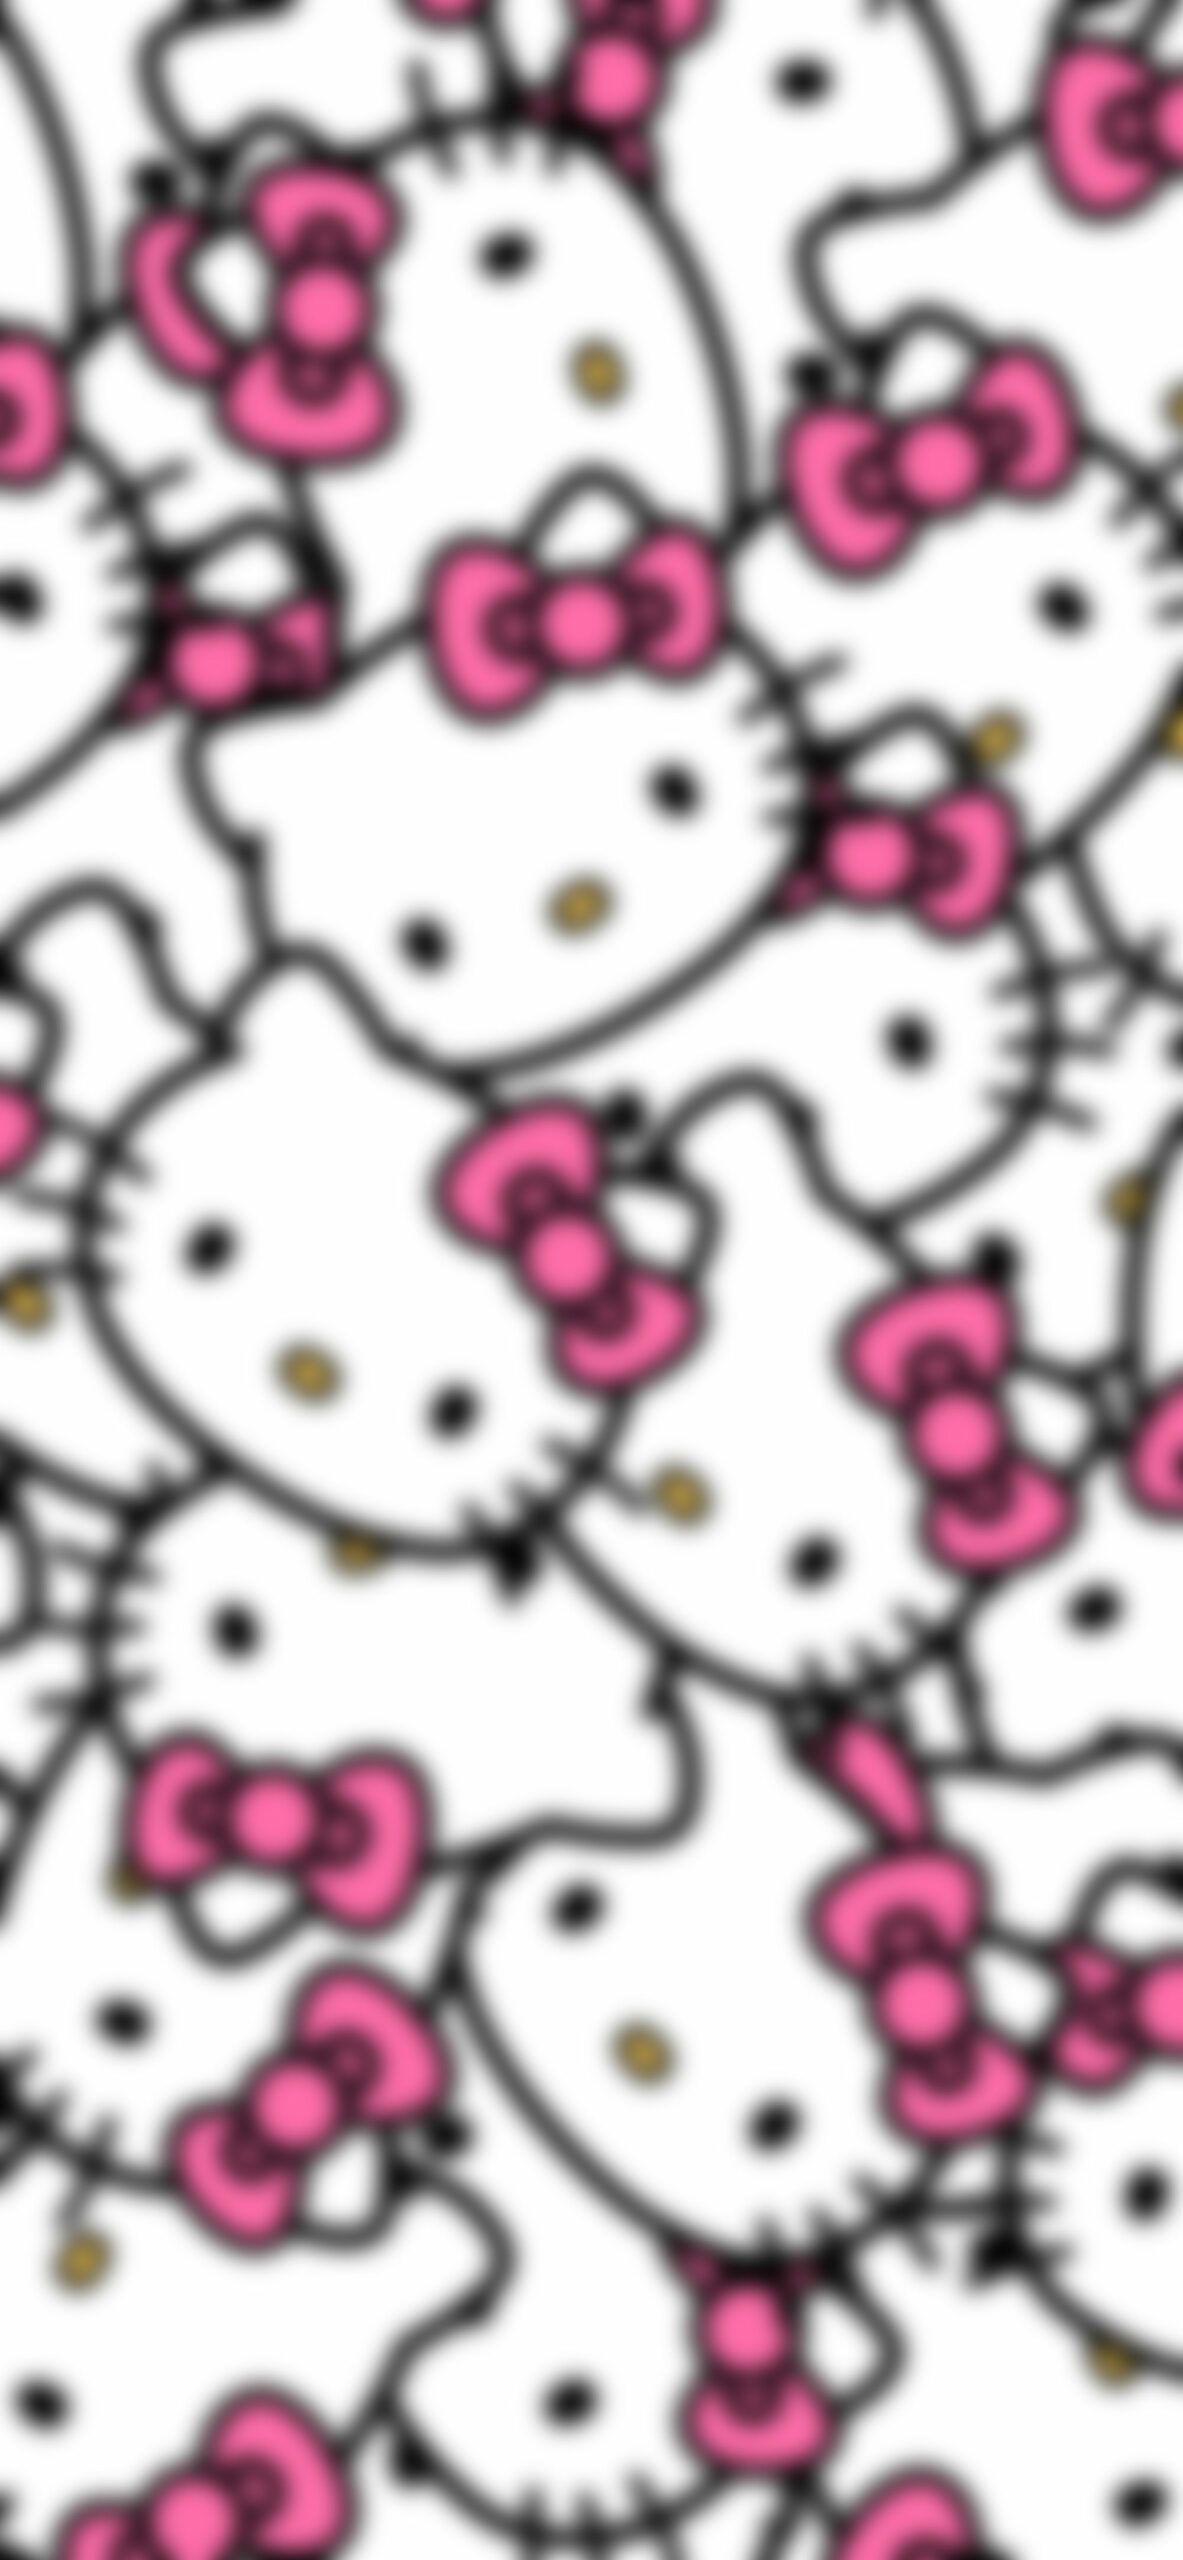 A hello kitty pattern with pink bows - Blurry